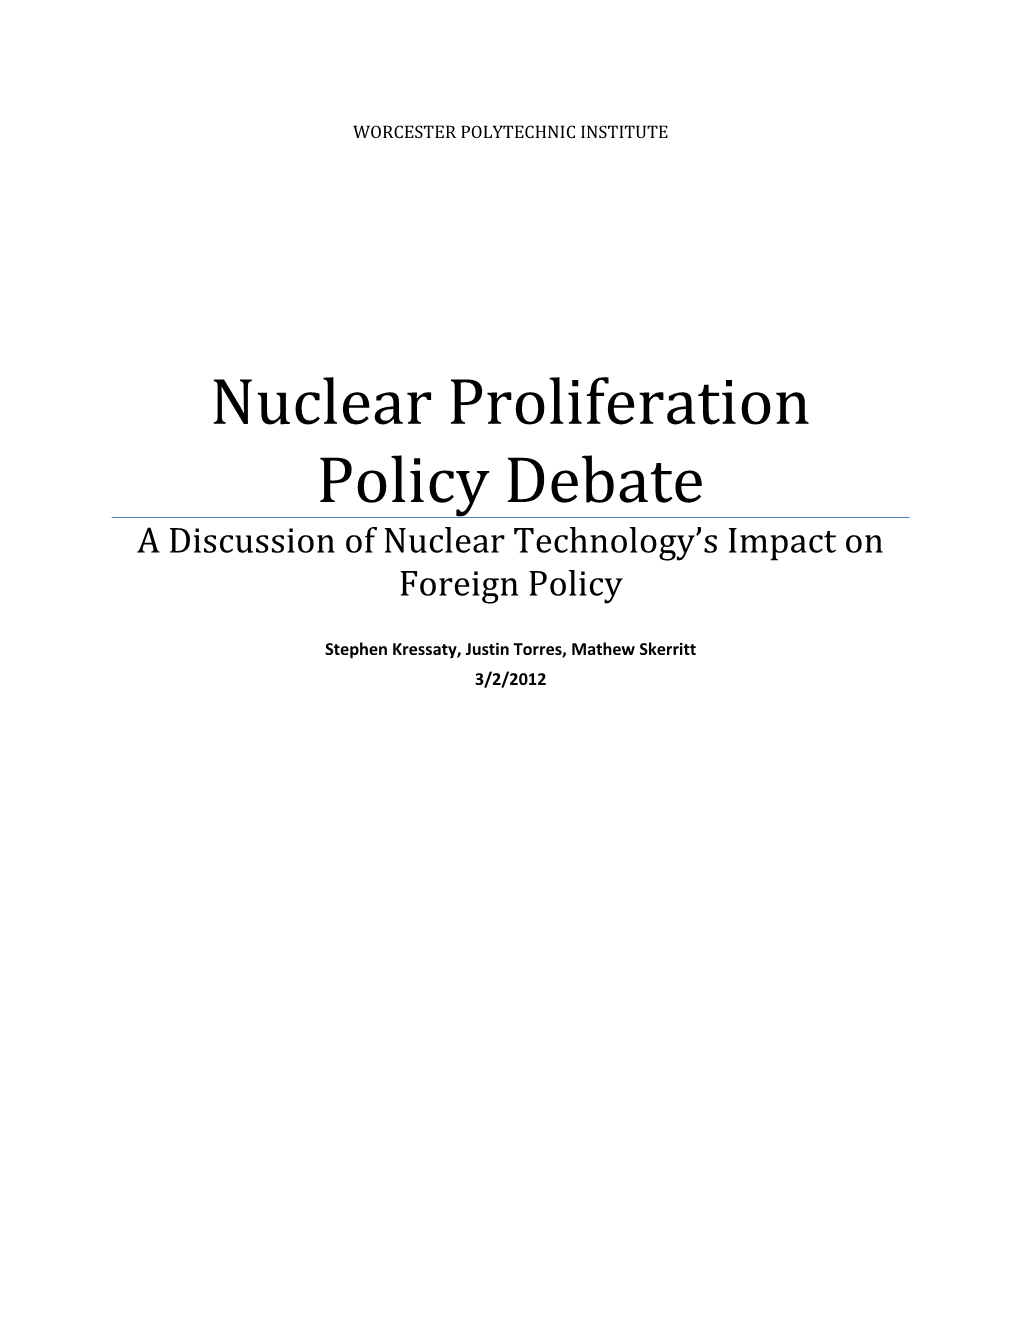 Nuclear Proliferation Policy Debate a Discussion of Nuclear Technology’S Impact on Foreign Policy